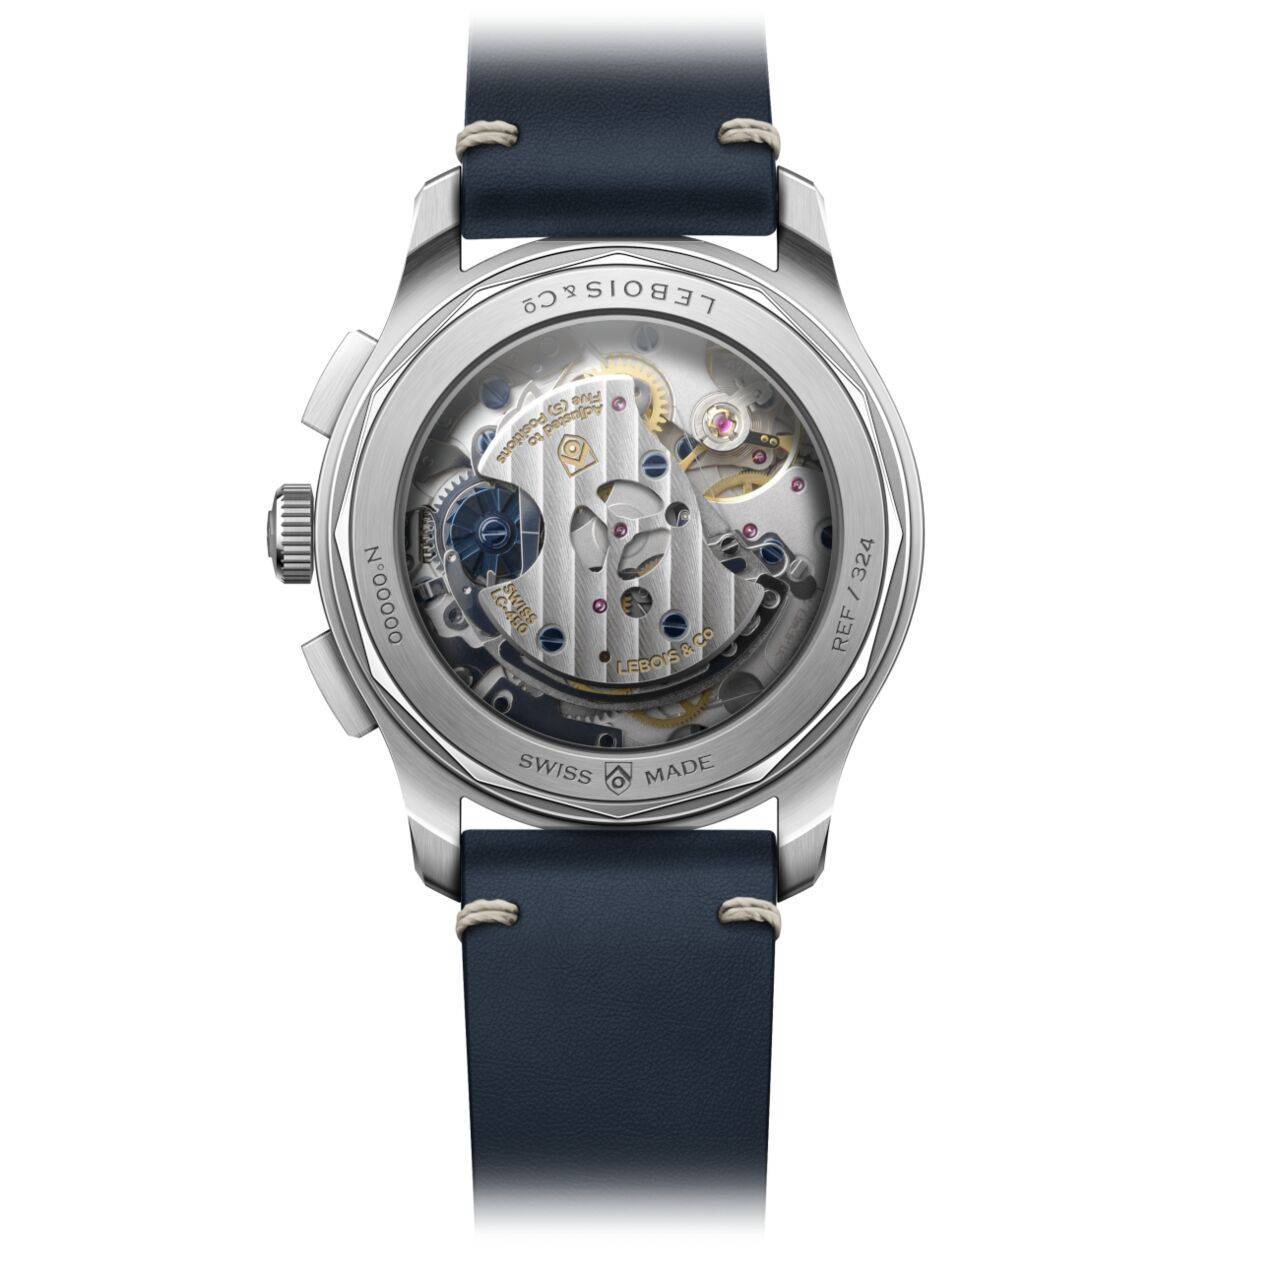 Heritage-Chronograph-Sector-Dial-324442-Midnight-Navy-Leather-caseback.jpg